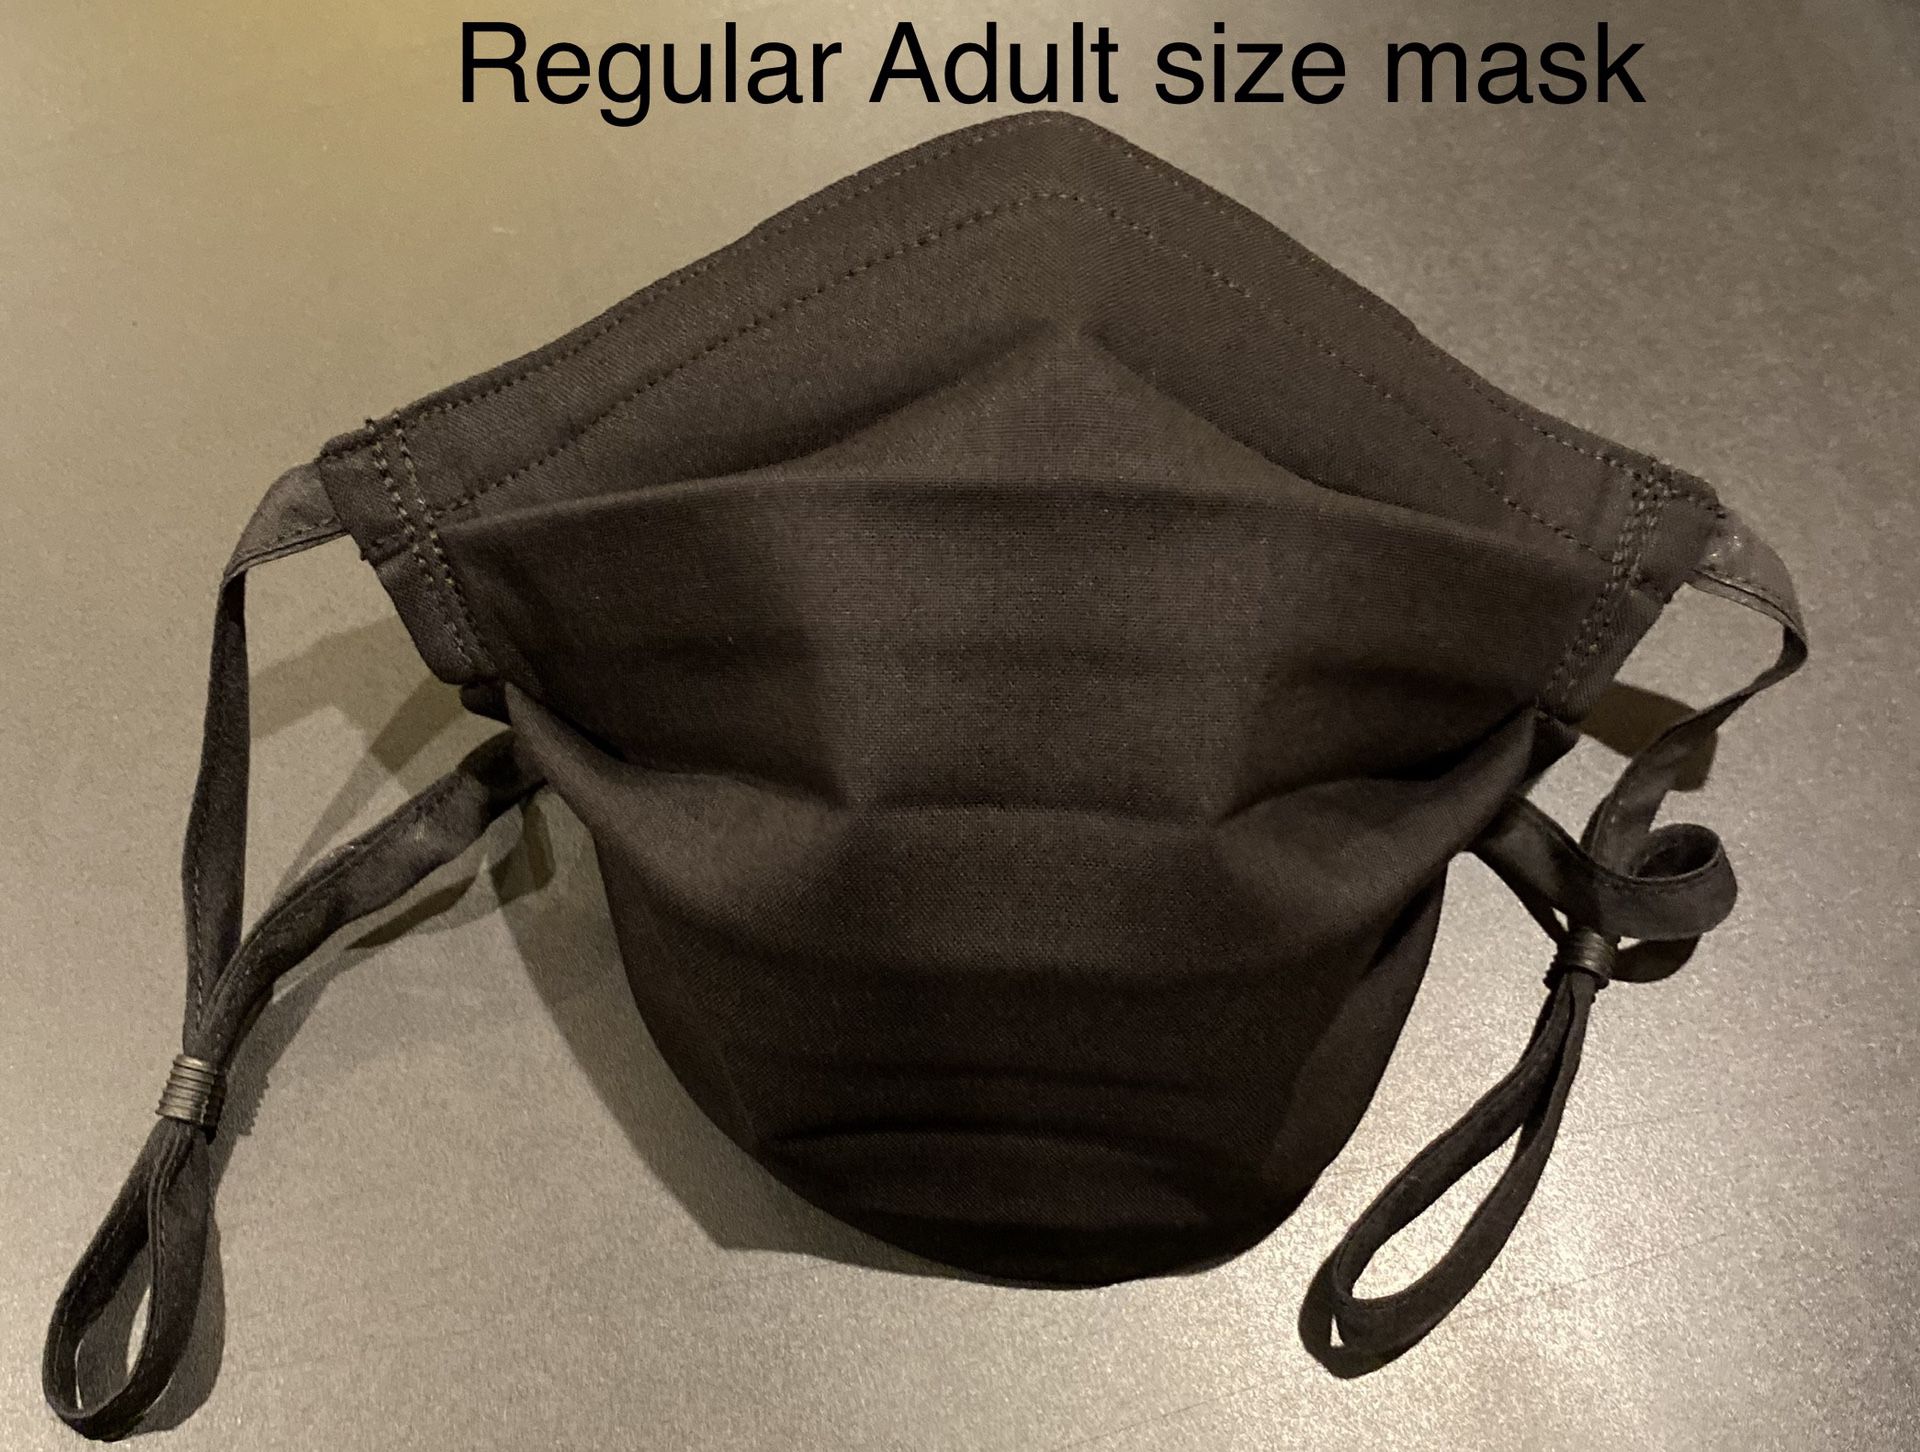 Handmade Solid Black Regular Adult face mask with Adjustable ear straps and nose wire